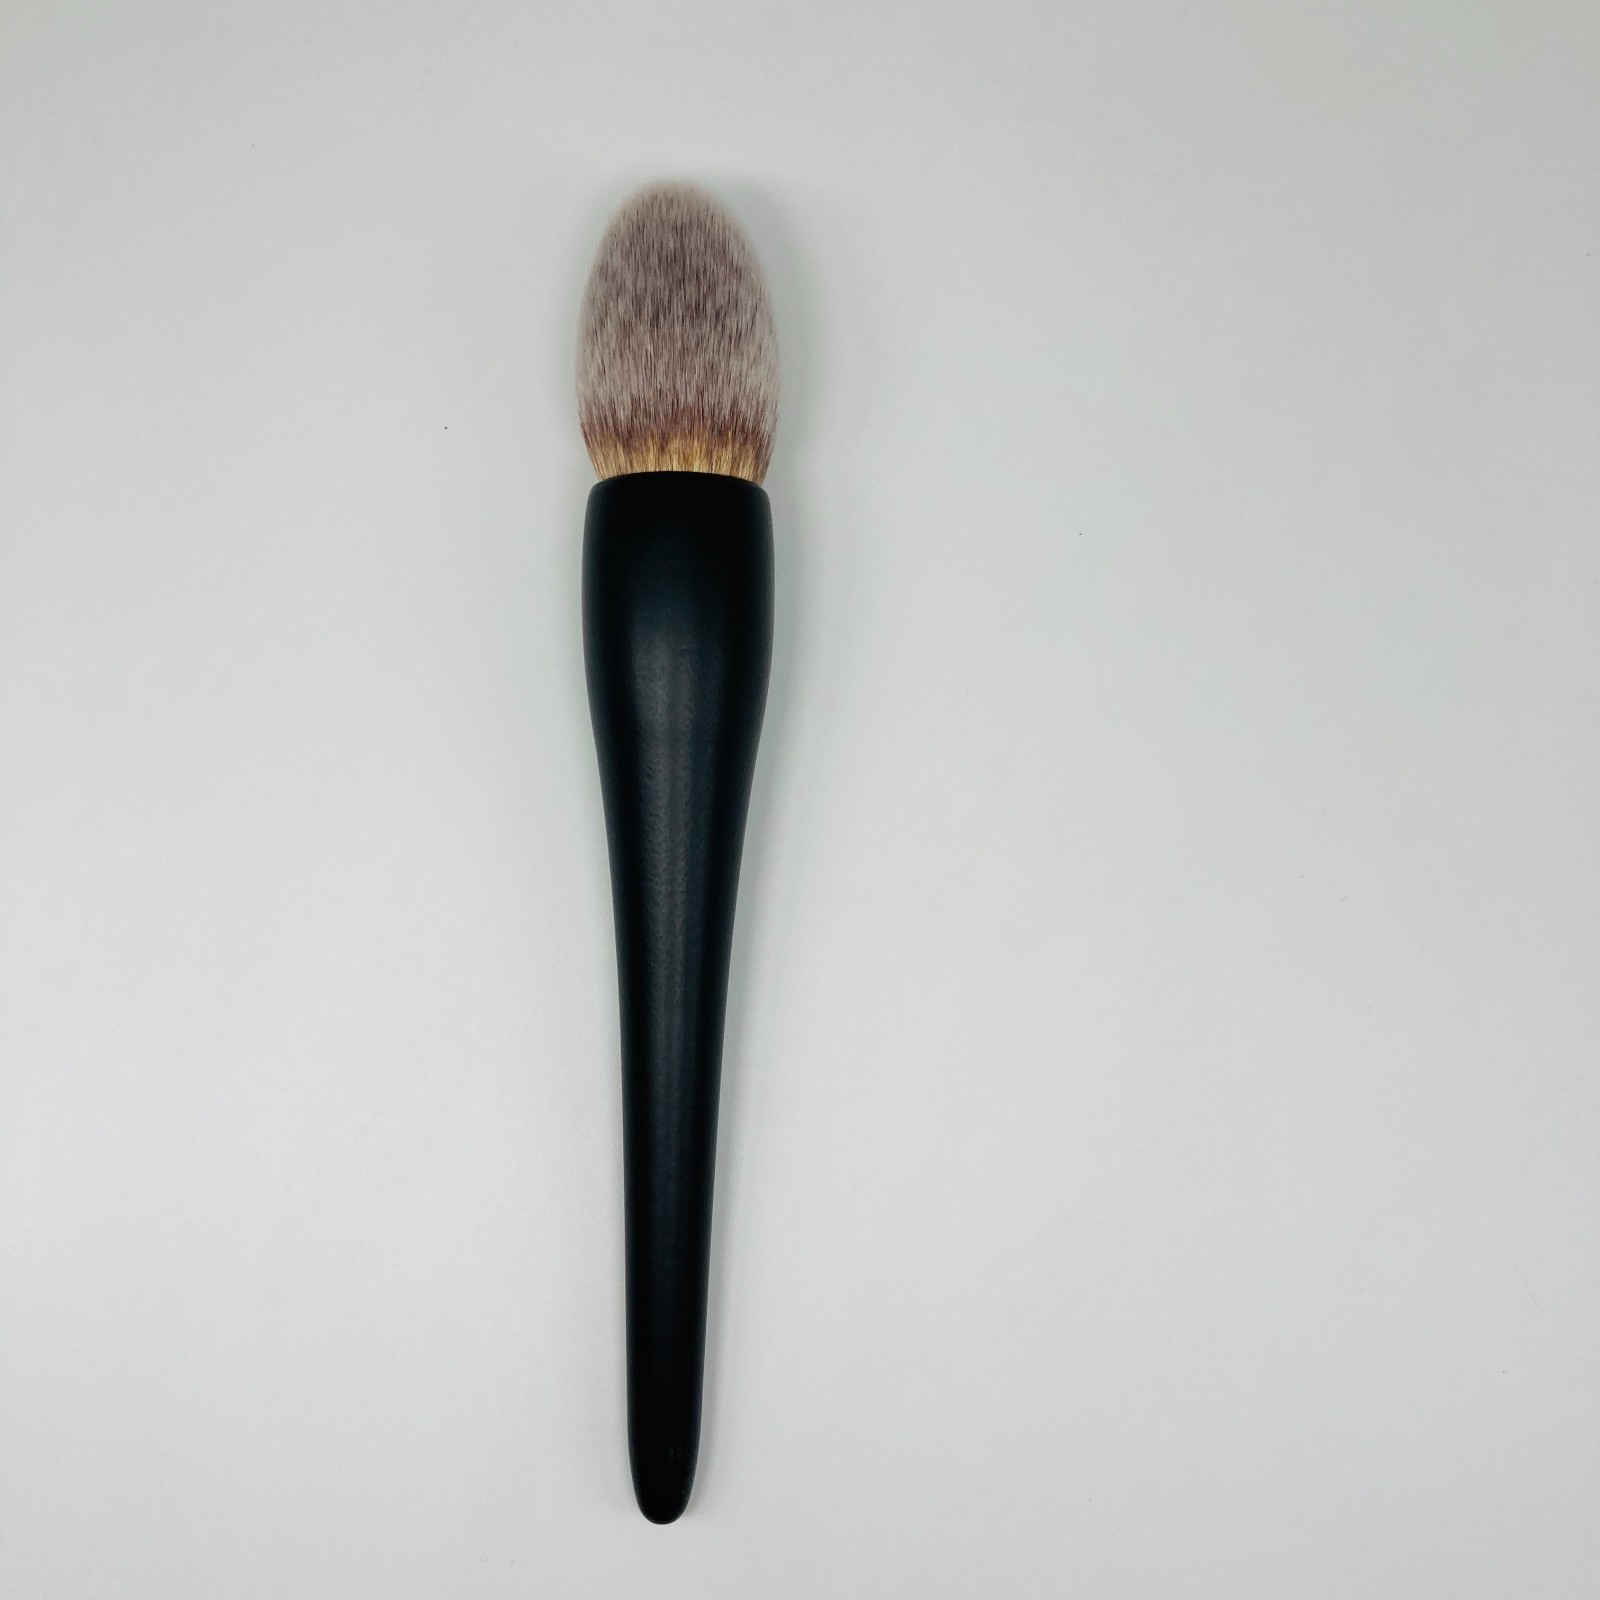 Suprabeauty promotional high quality makeup brushes supply bulk buy-1